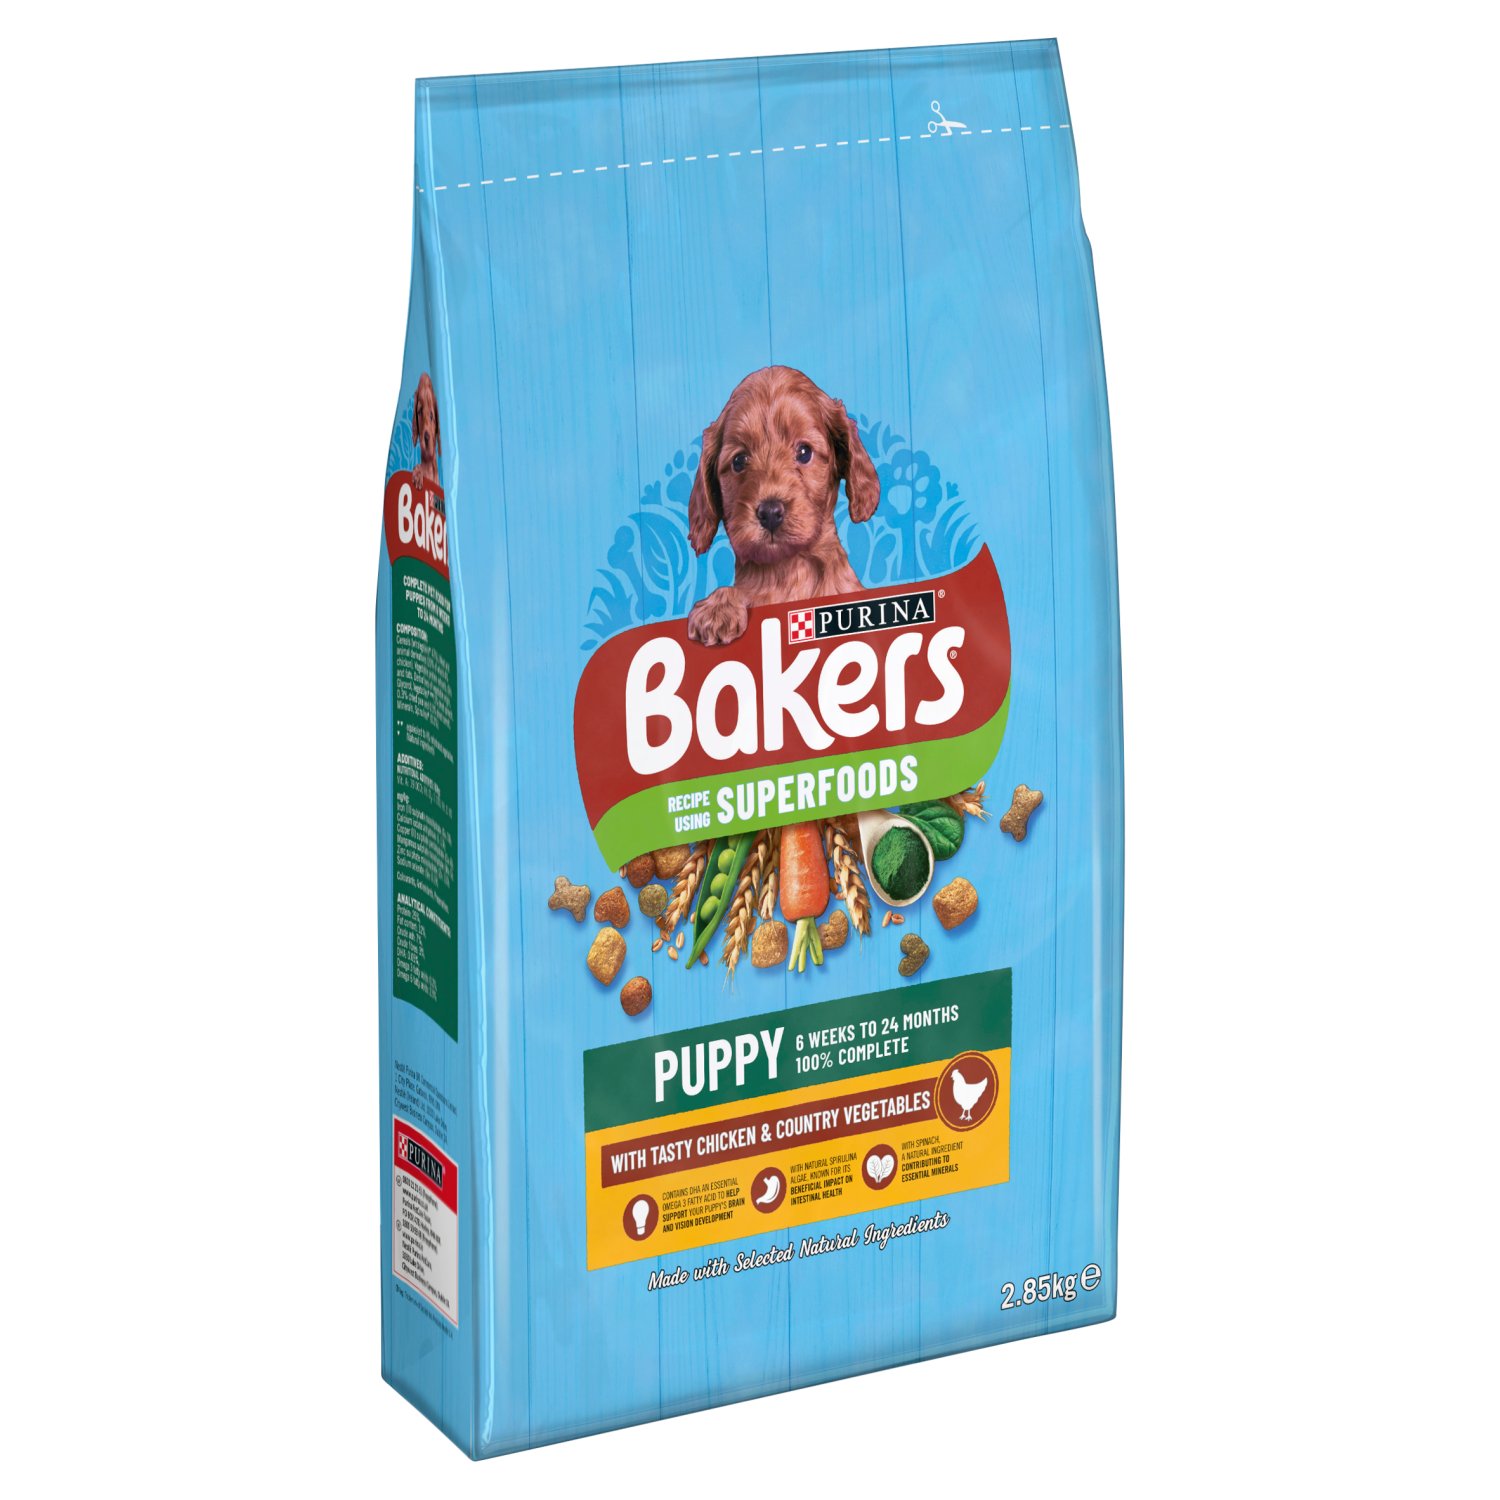 The Bakers® story begins way back in 1851 when Edward Baker set up a family flour business. Fast forward to 1991 when BAKERS® Complete was launched, because Edward Baker believed that dry dog food should be every bit as tasty as it is nutritious. Our recipe has been made with a variety of tender* meaty chunks & wholegrains for quality, tasty goodness. Each meal contains the every day nutrients your dog needs to get on with all the playful & cheeky things that happy & healthy BAKERS® dogs do!
*softness varying with time.